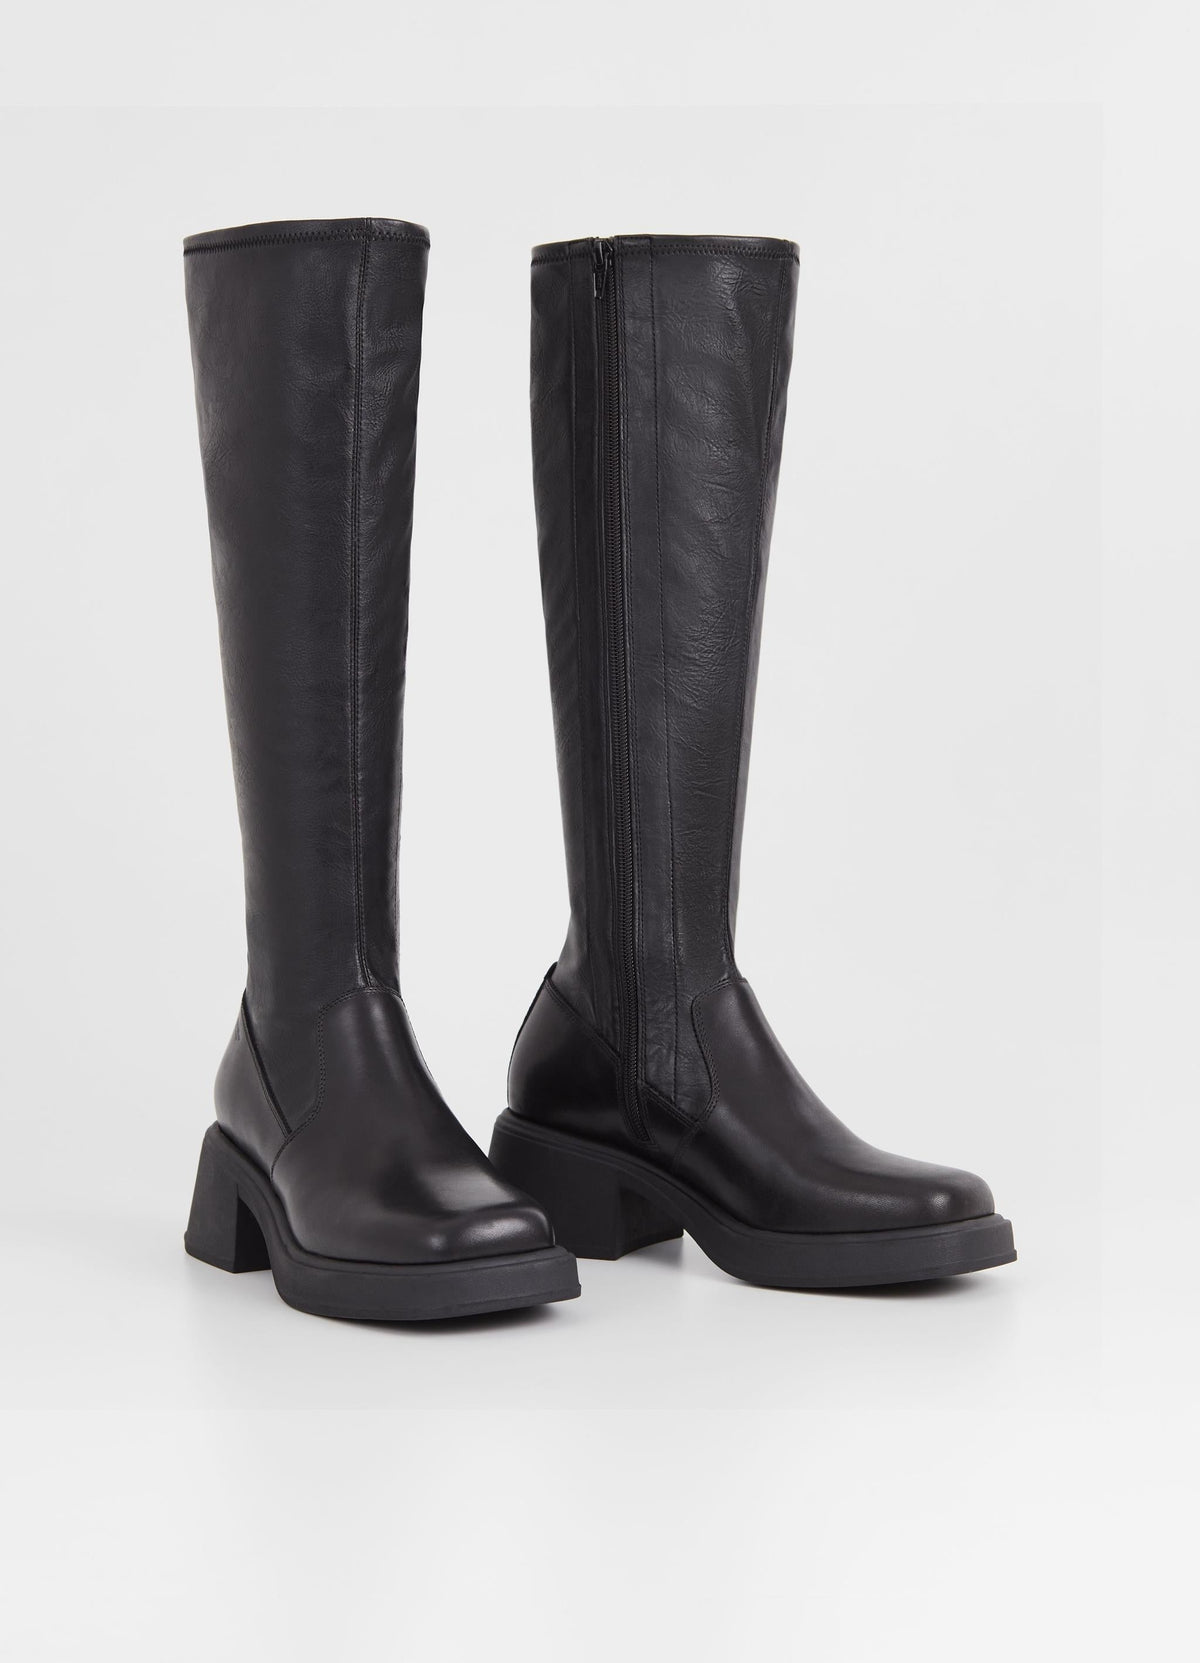 Tall leather and synthetic leather boots with moulded chunky sole and block heel